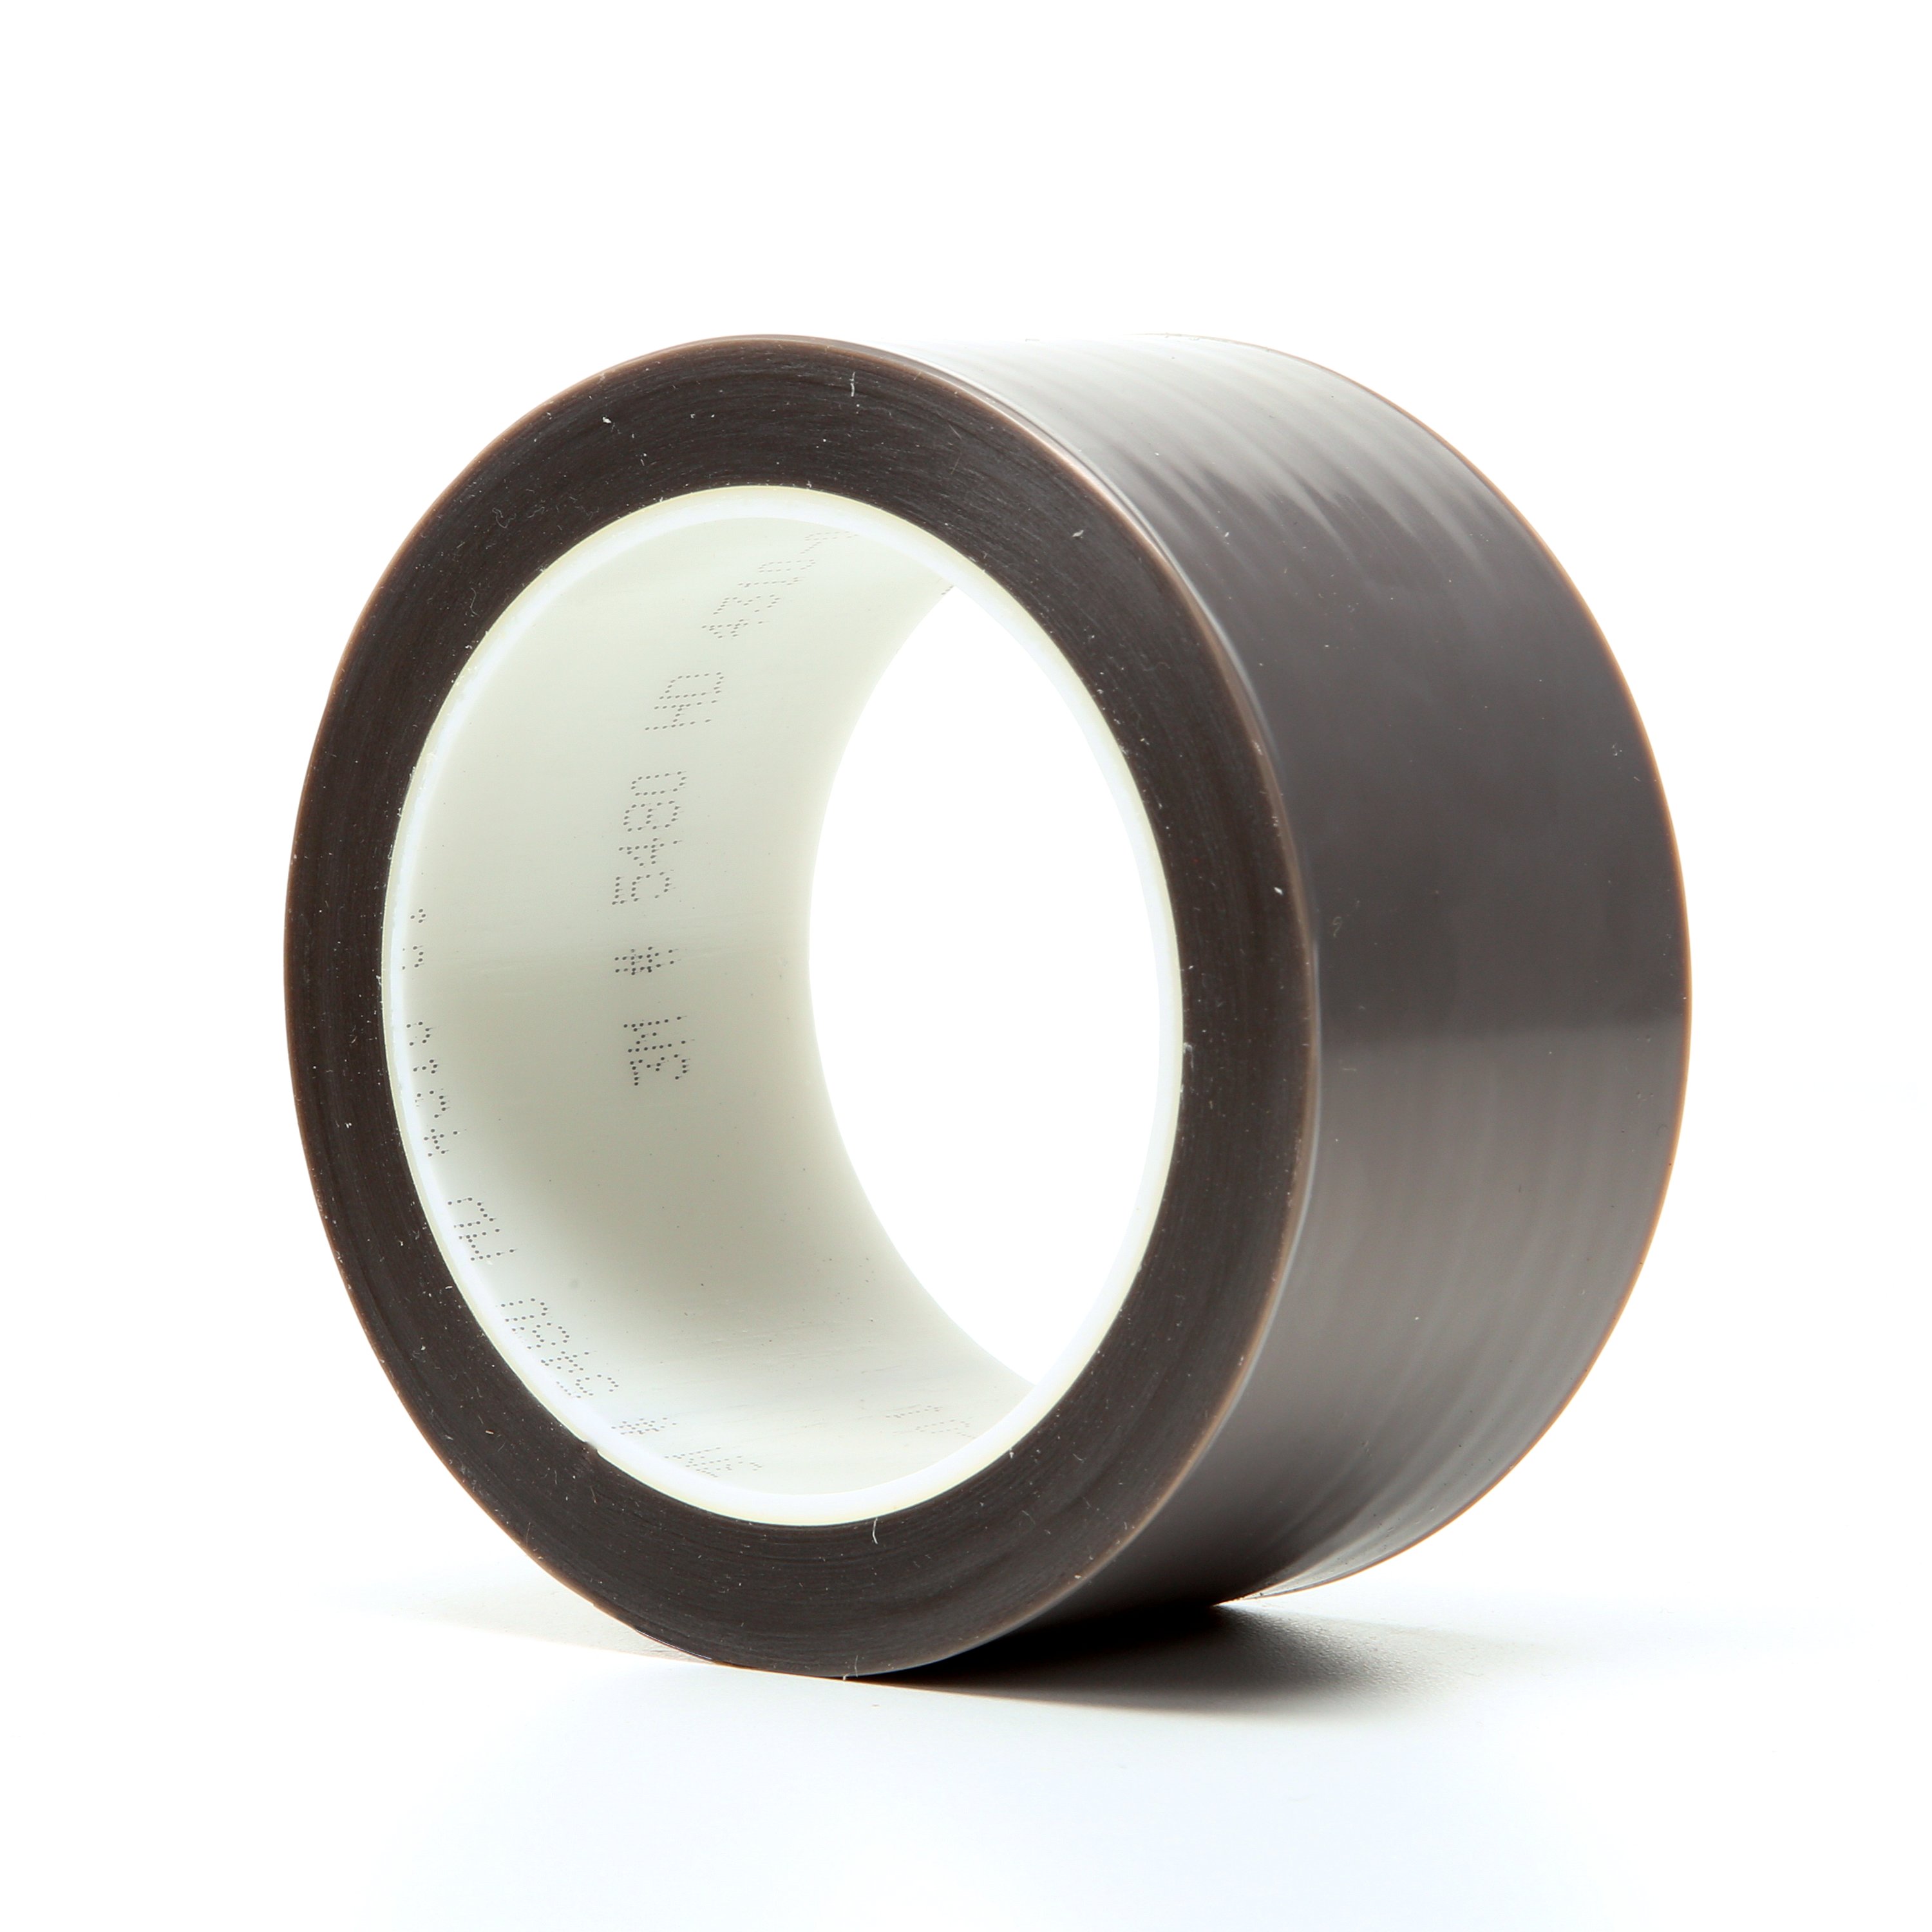 skived film backing provides good conformability when unwound from the roll compared to typical extruded PTFE film tapes.